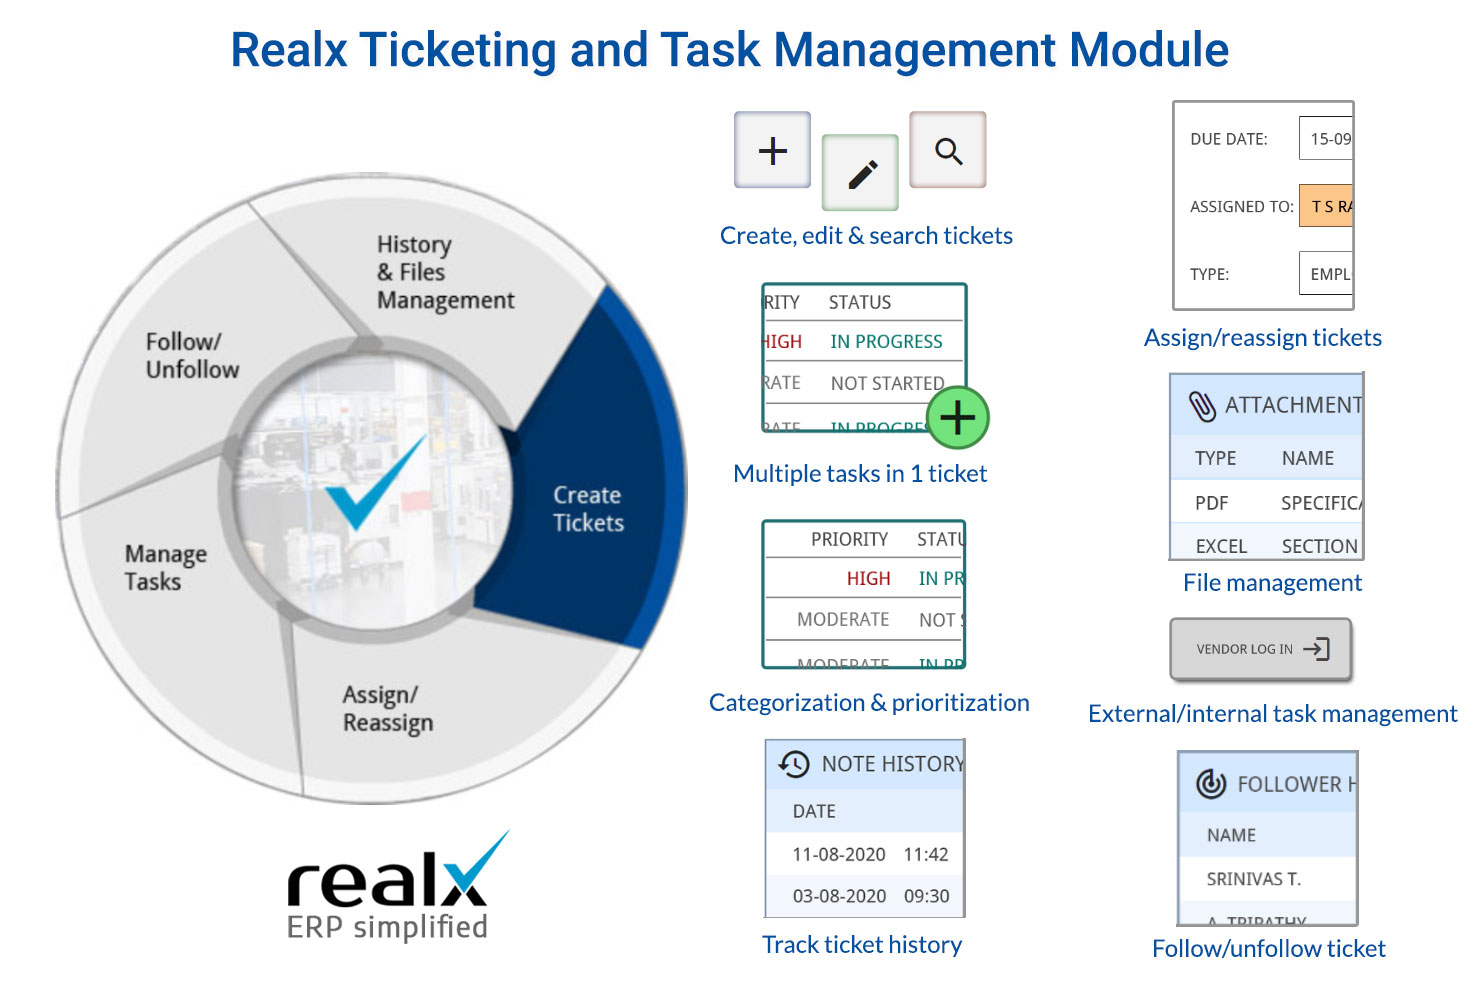 Manage tasks and stay connected seamlessly through Realx ERP's easy-to-use ticketing system, keeping your communications and tasks effortlessly organized in a single, accessible platform.